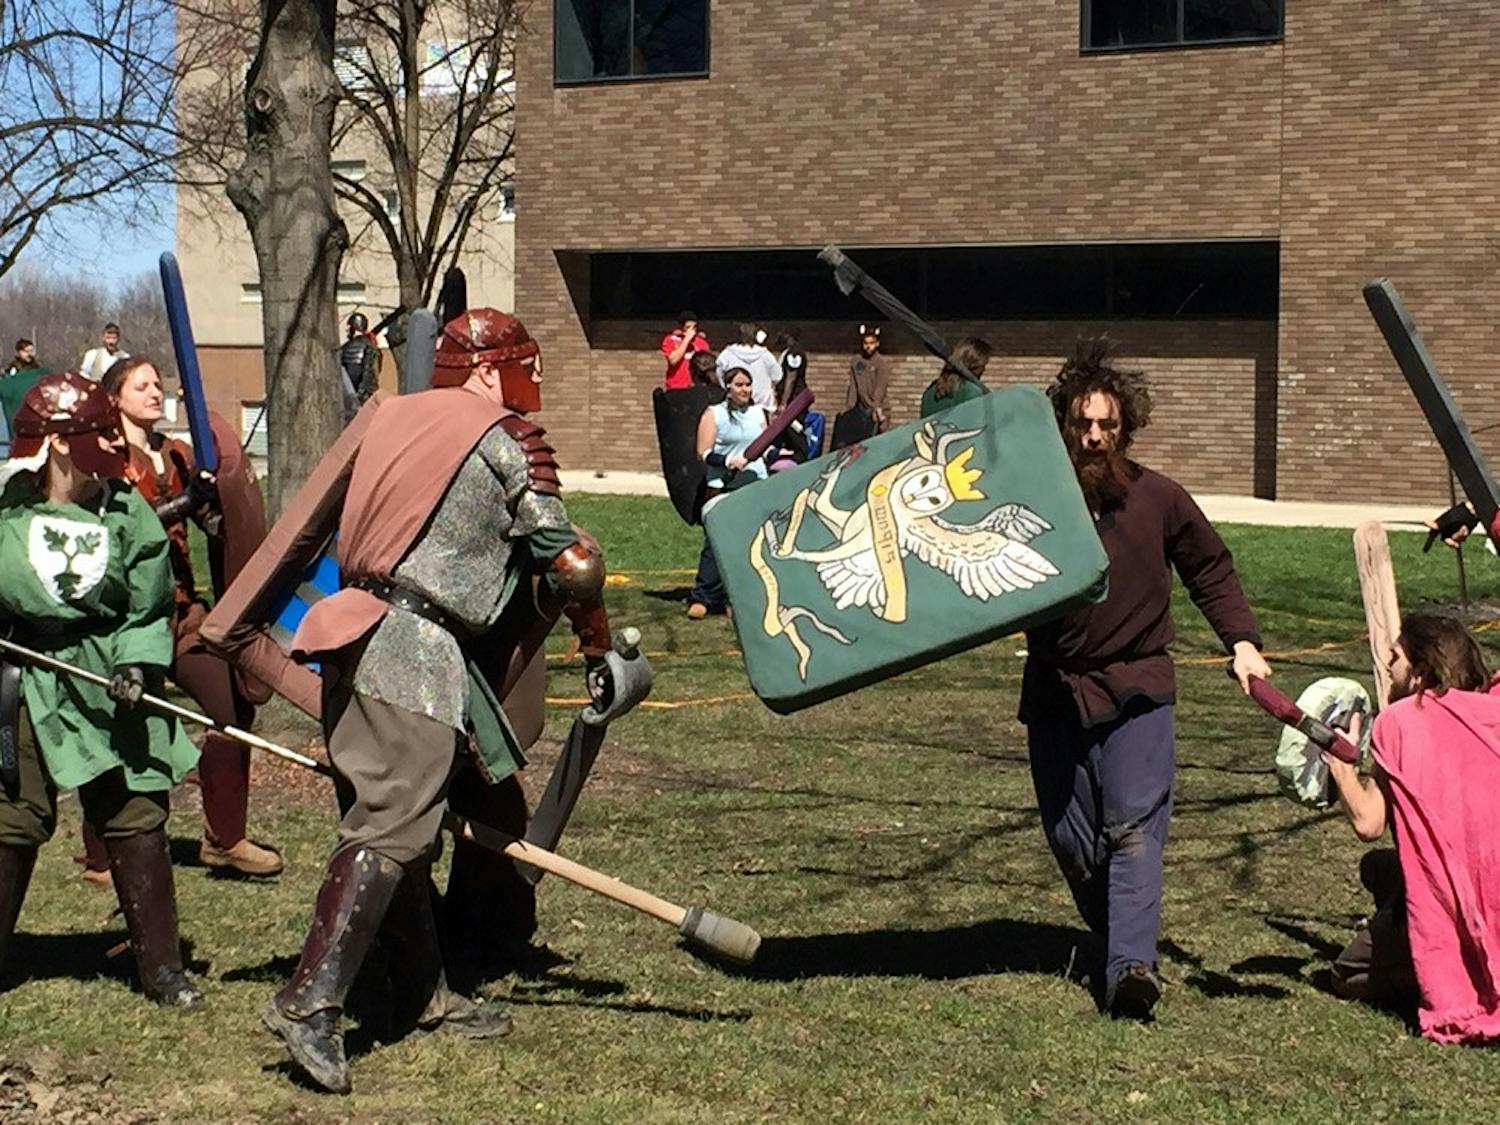 Clemens is usually a battlefield of ideas, but this weekend, it was medieval battlefield.